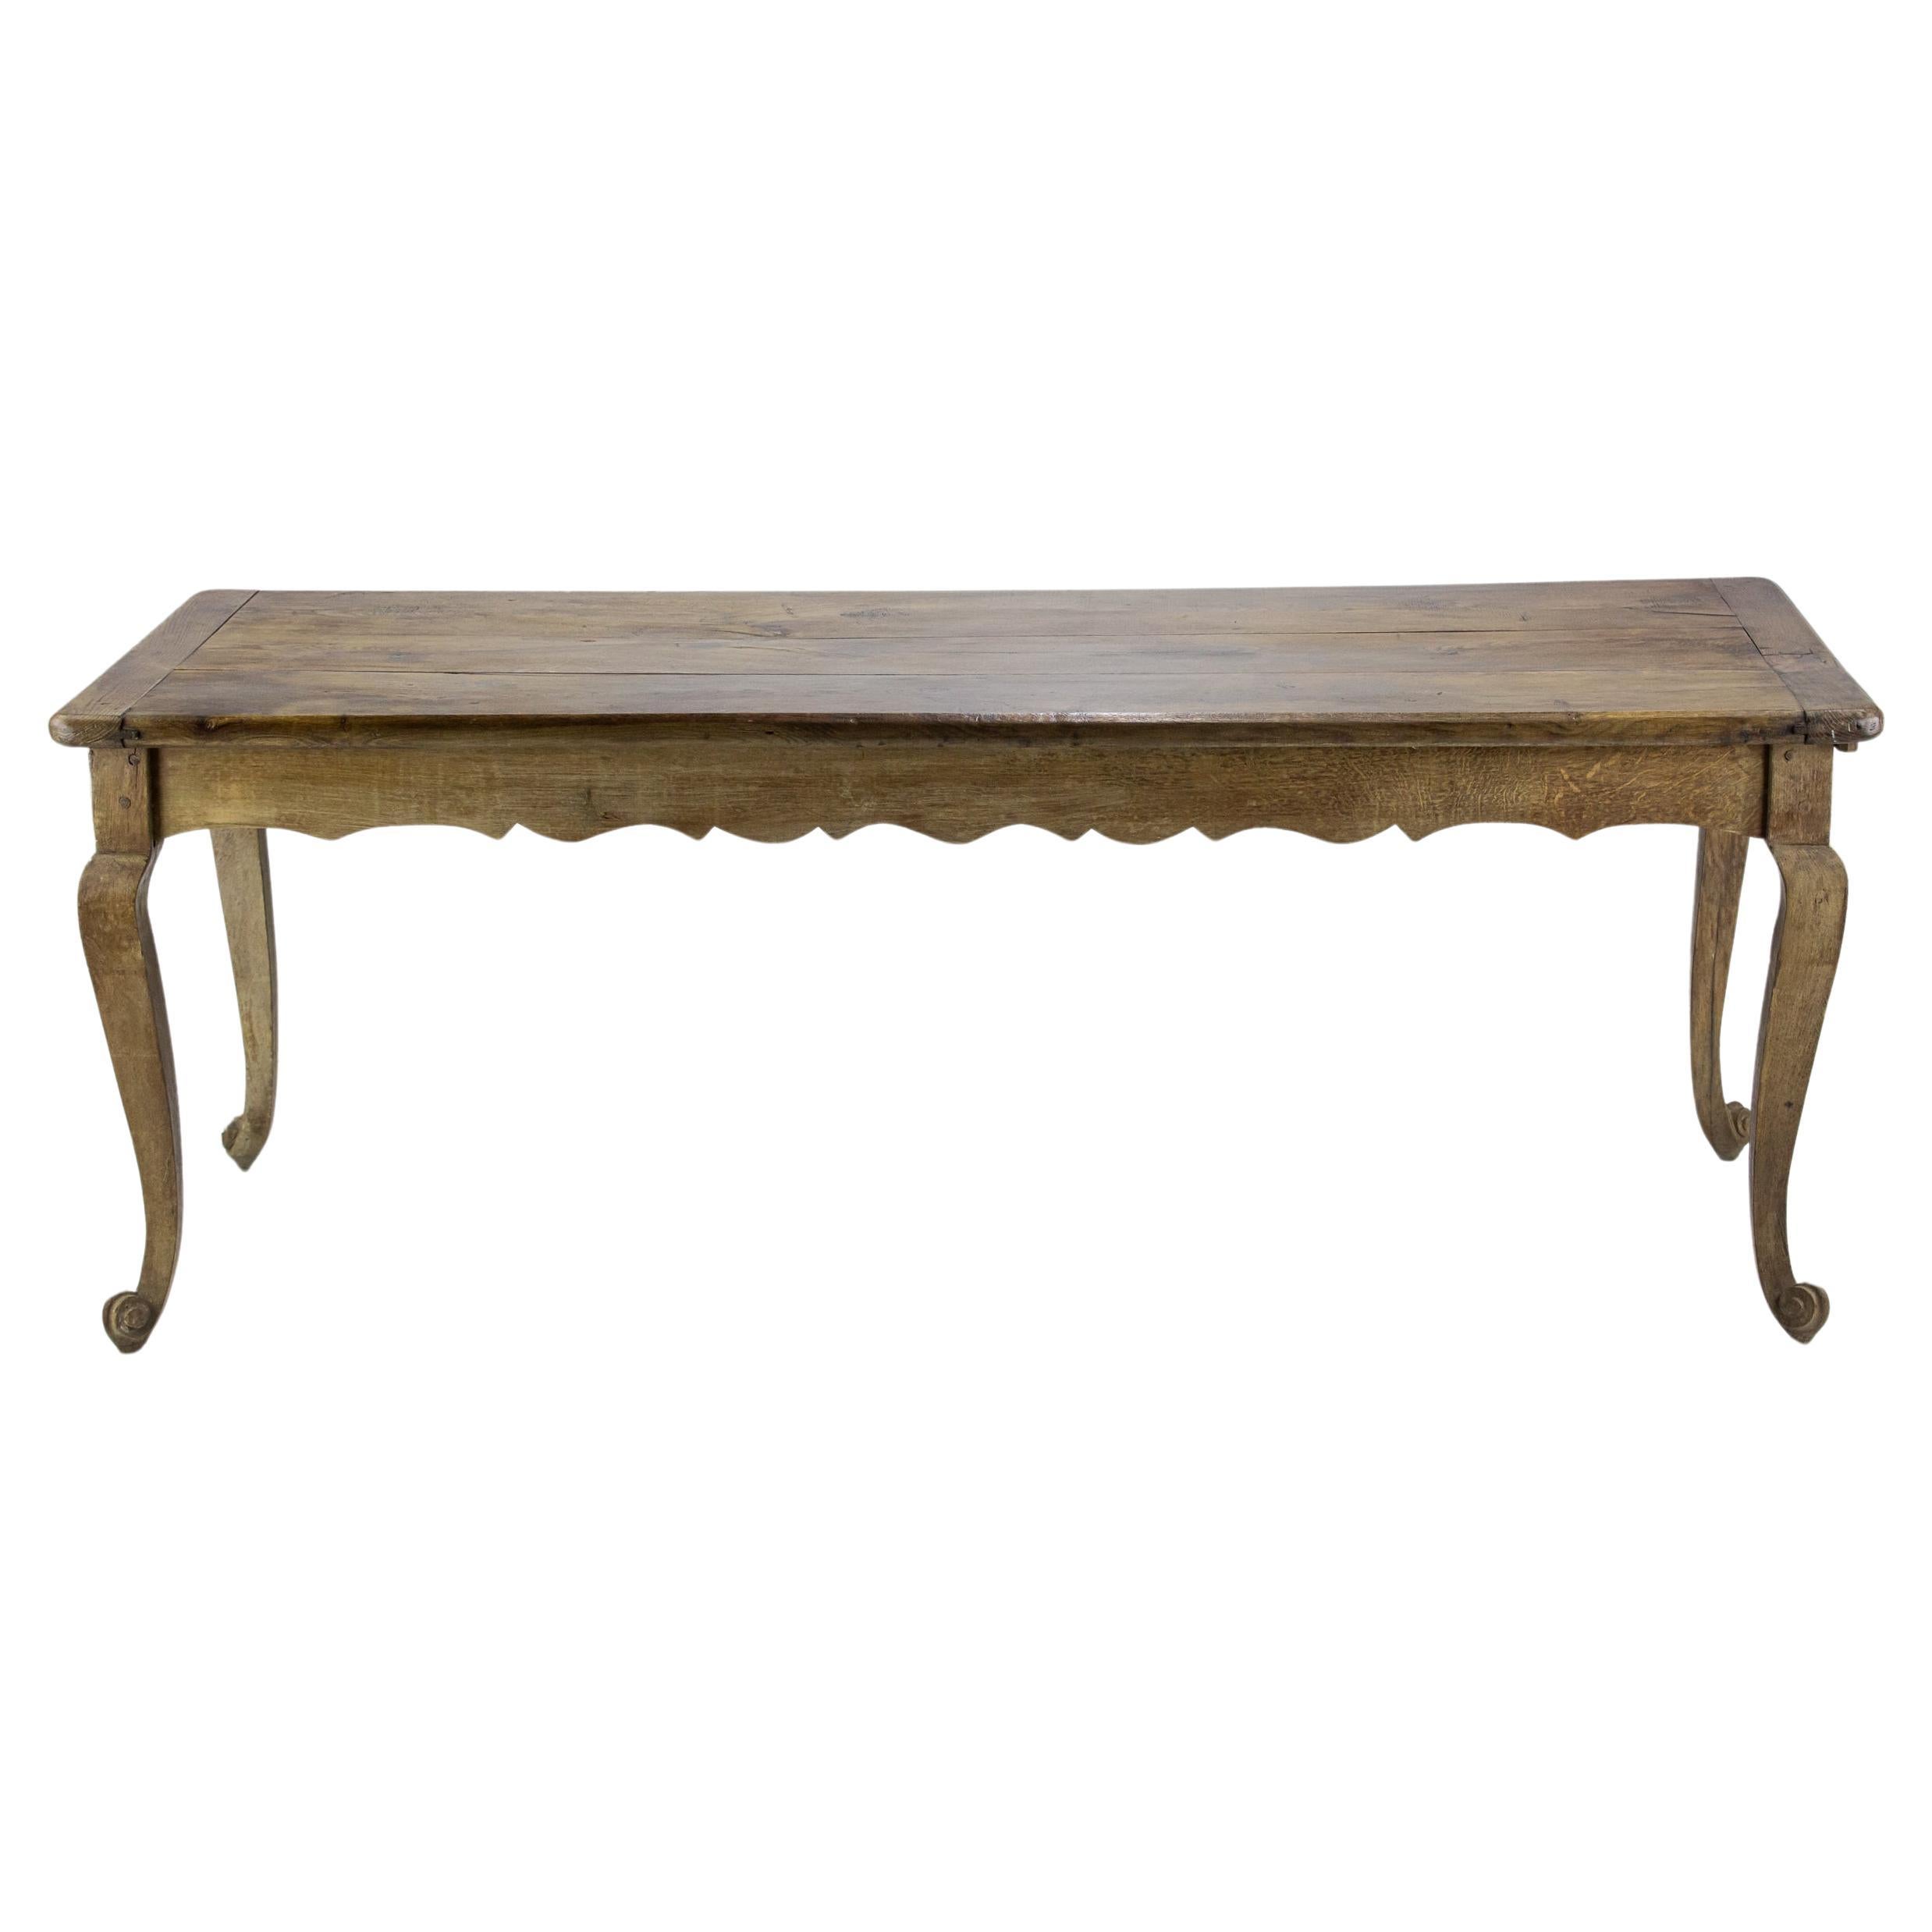 Impressive 19th Century Louis XV style Country Farmhouse Table For Sale